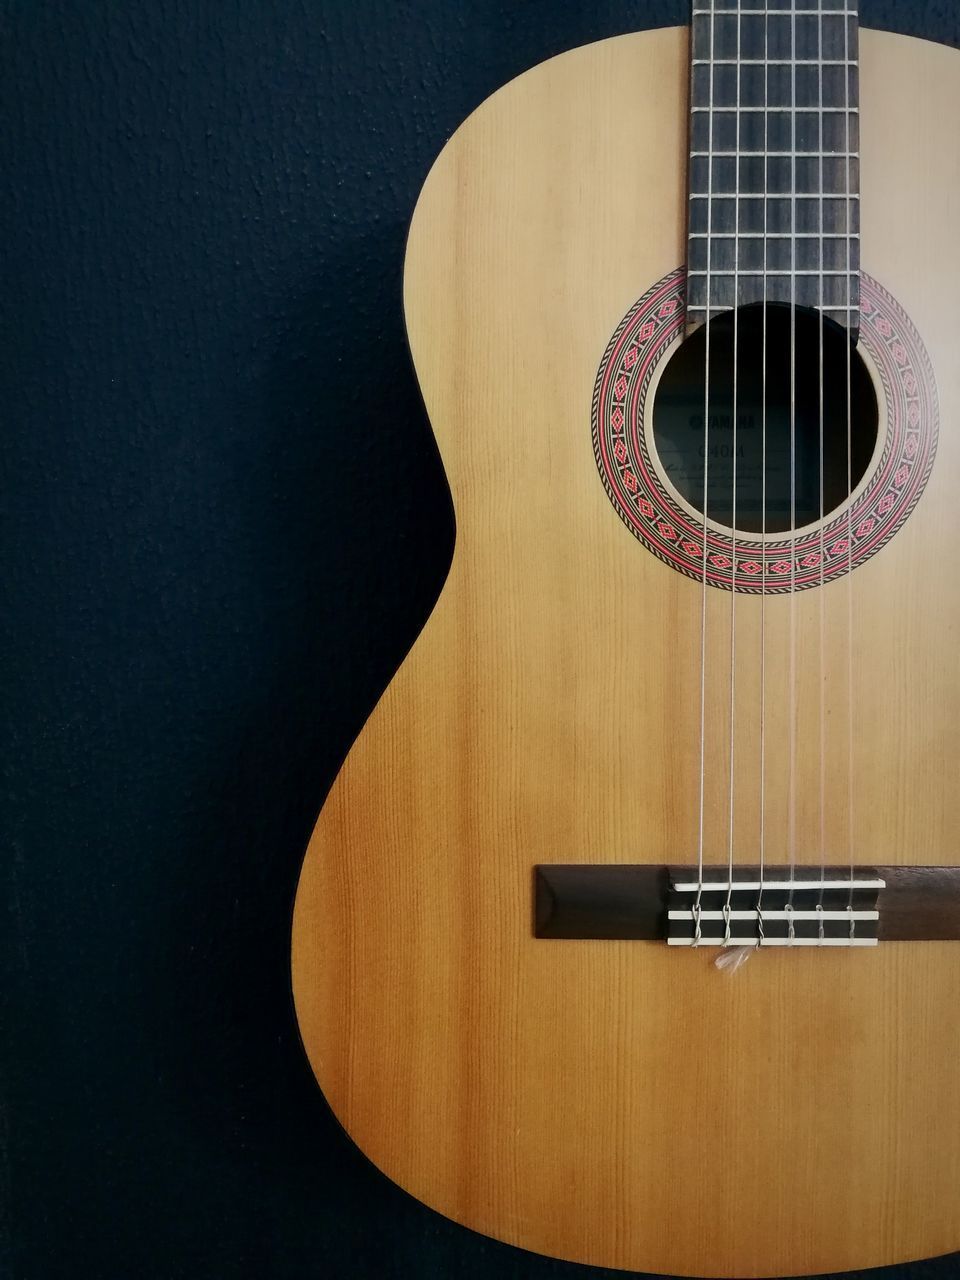 CLOSE-UP OF GUITAR AGAINST THE BACKGROUND